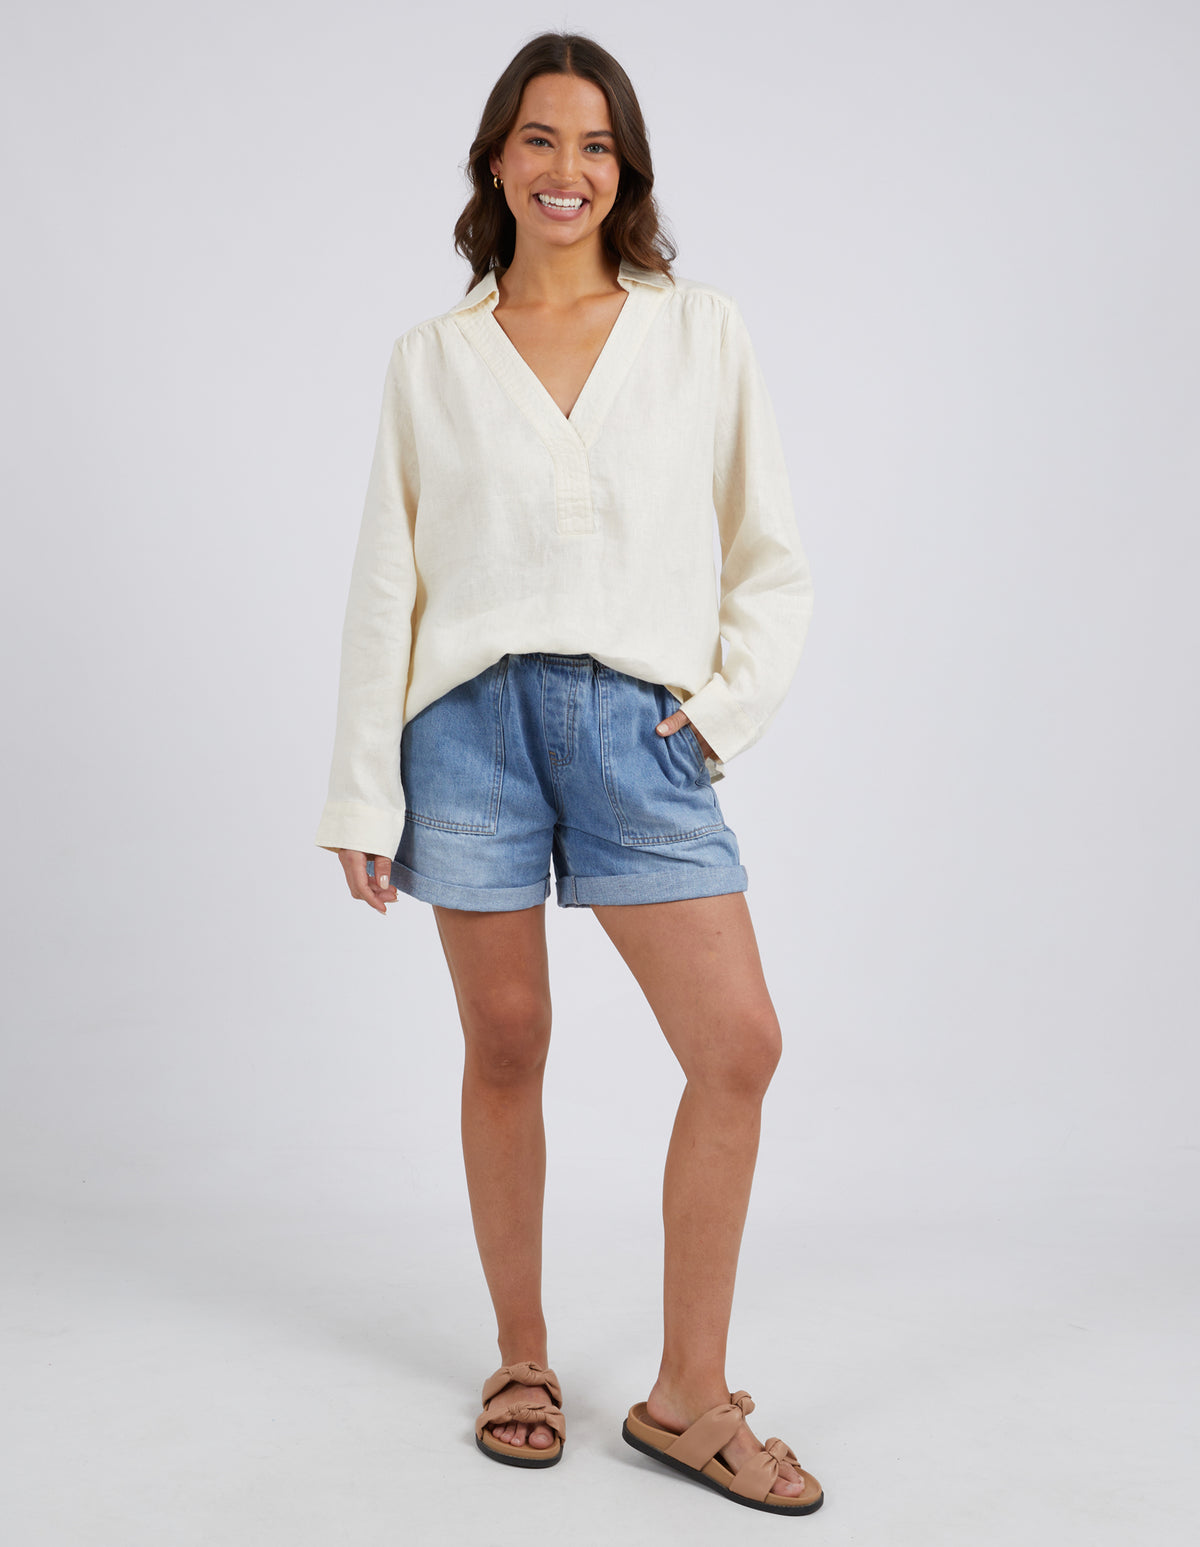 Blair Open Neck Shirt - Toasted Coconut - Elm Lifestyle